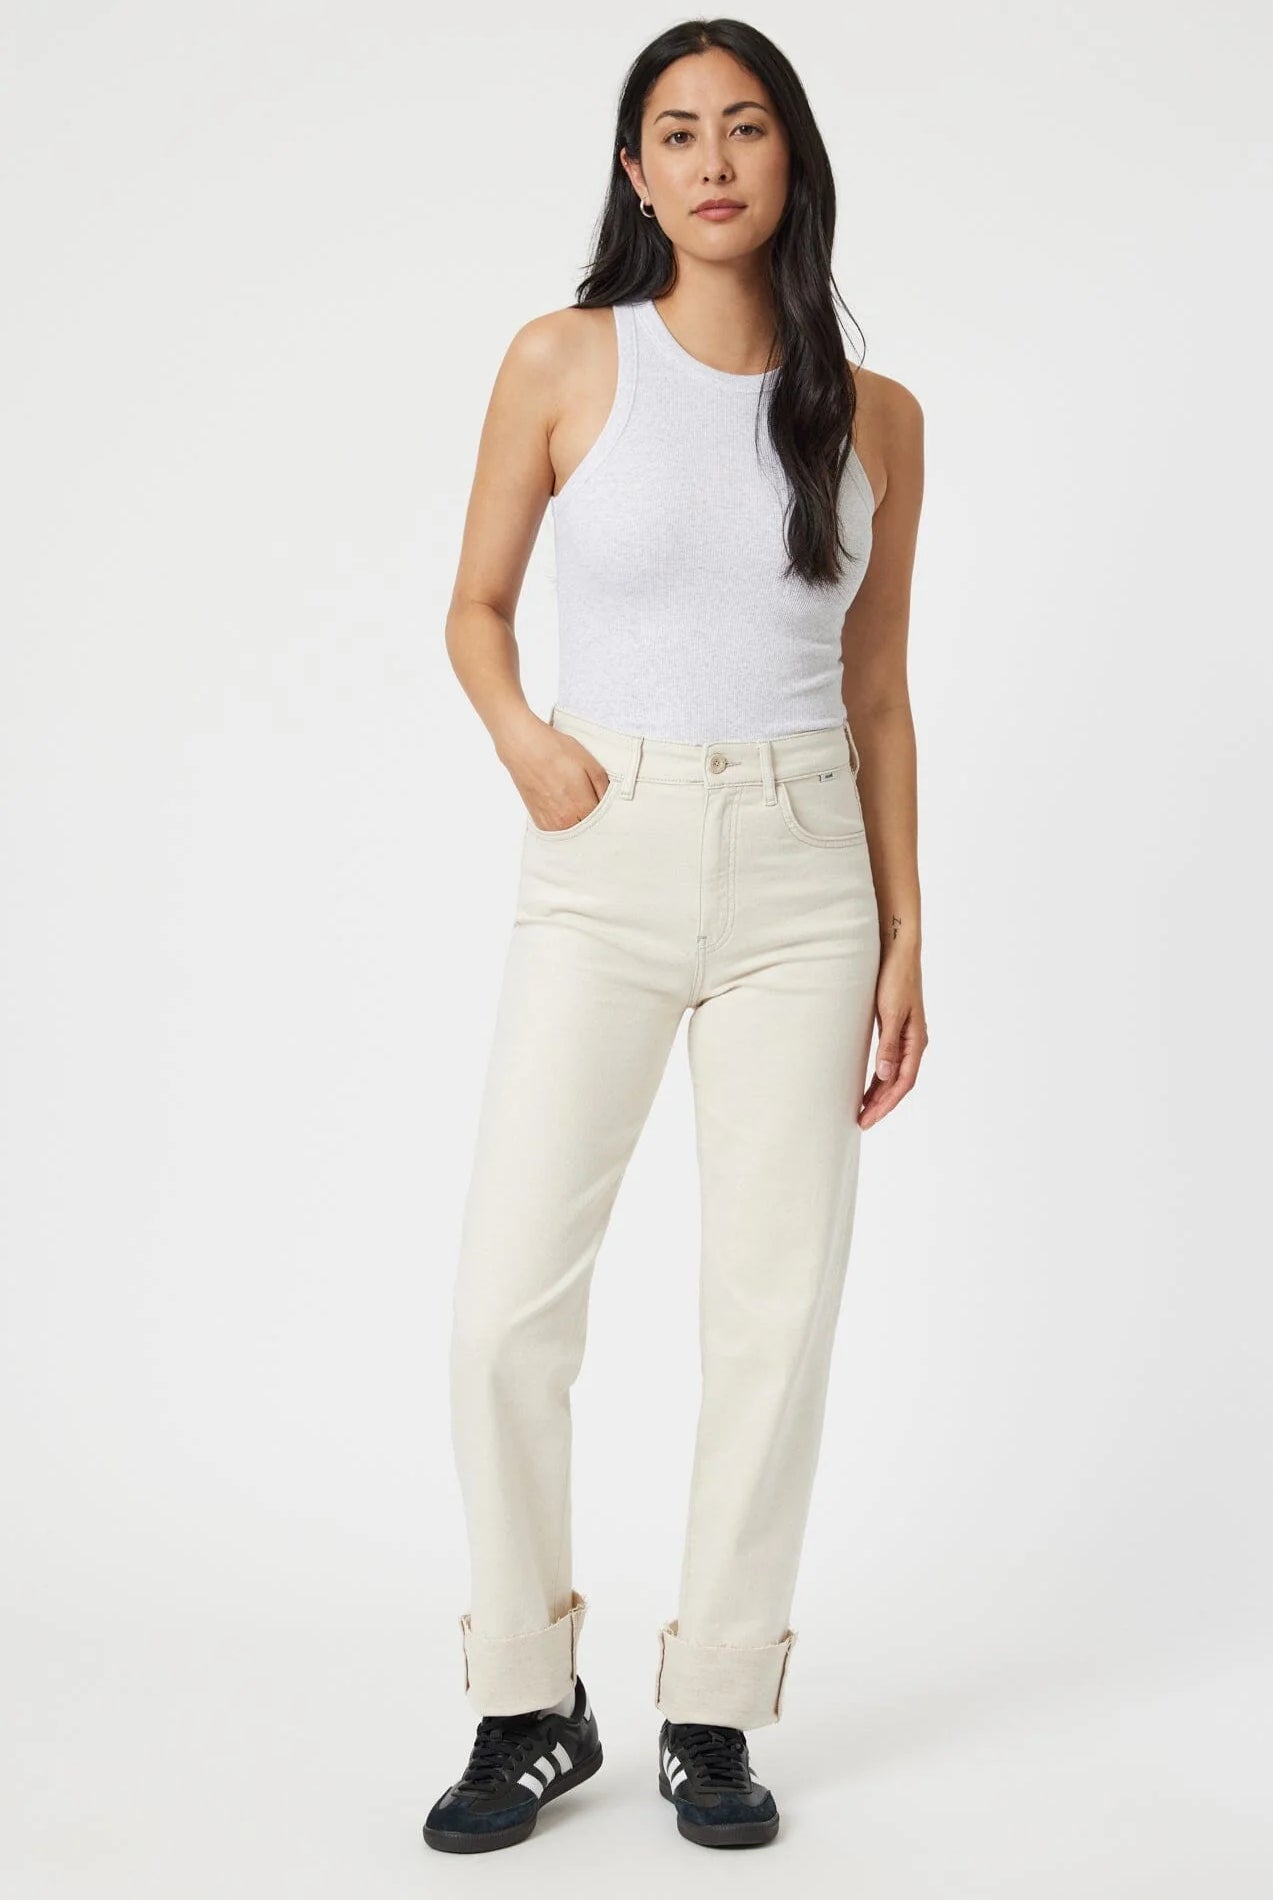 Ivory Jeans Apex Ethical Boutique